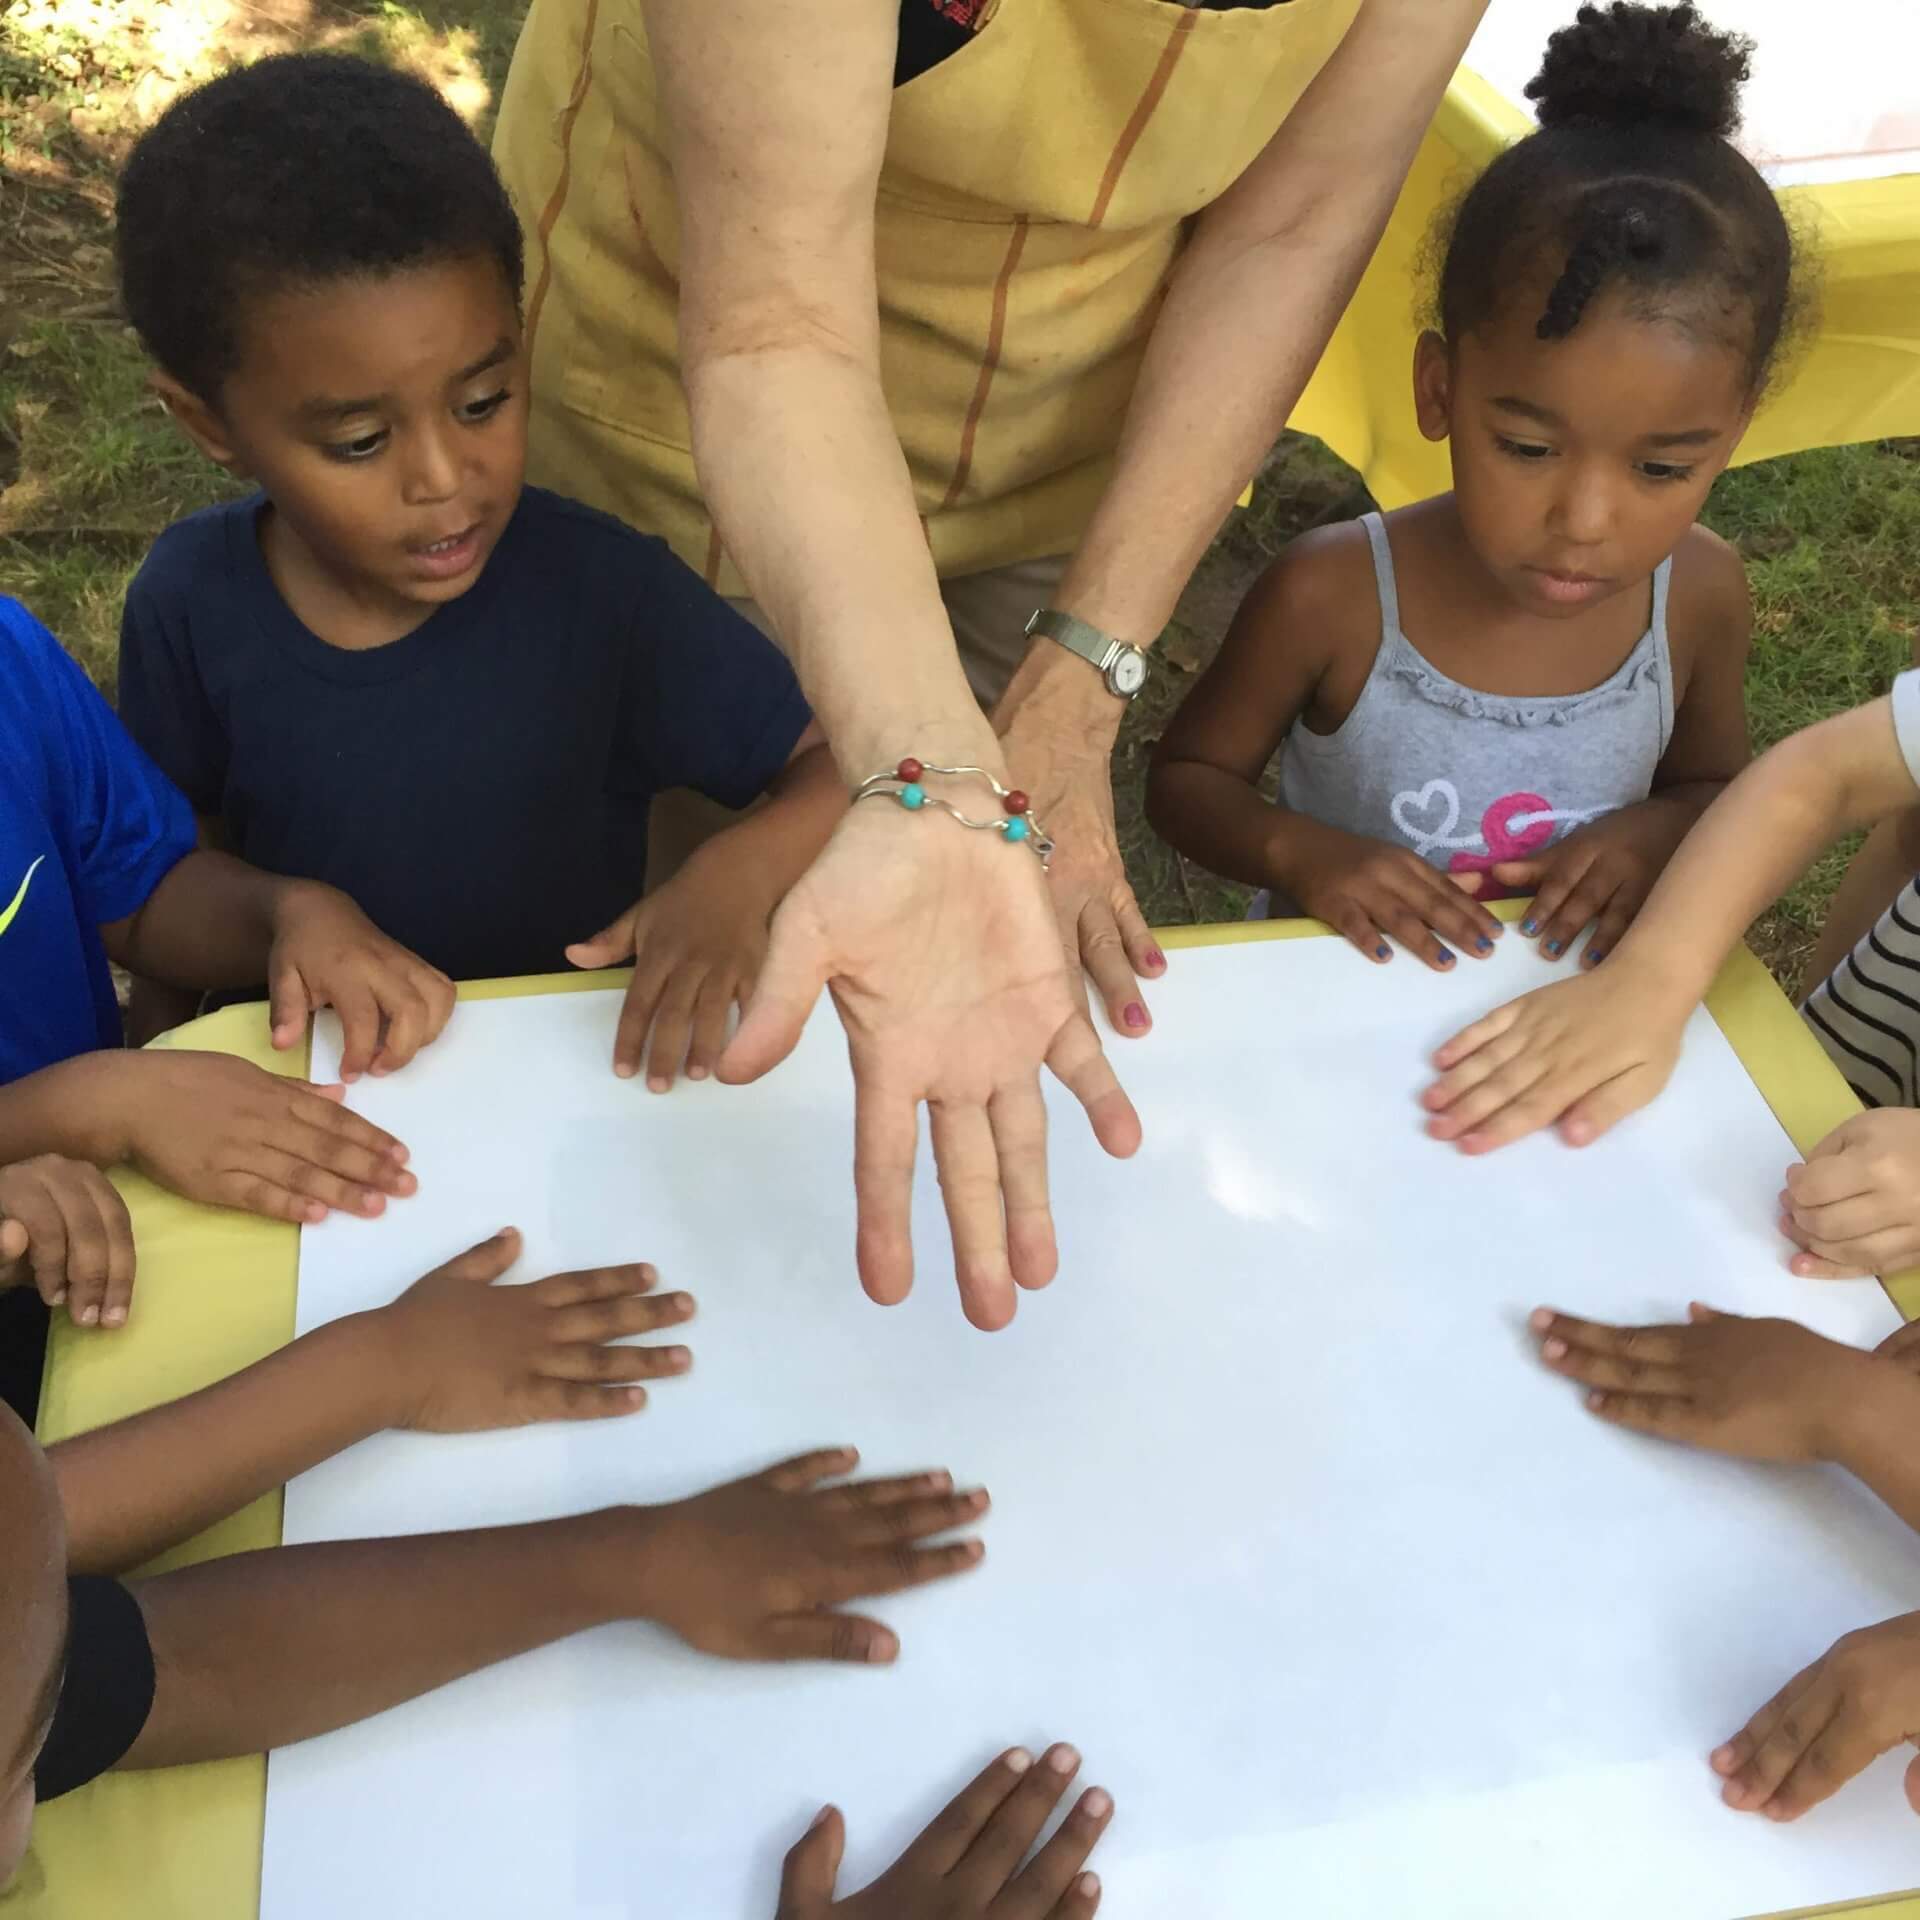 Young children gathered around a table getting ready to make an art project on a large, white piece of paper.